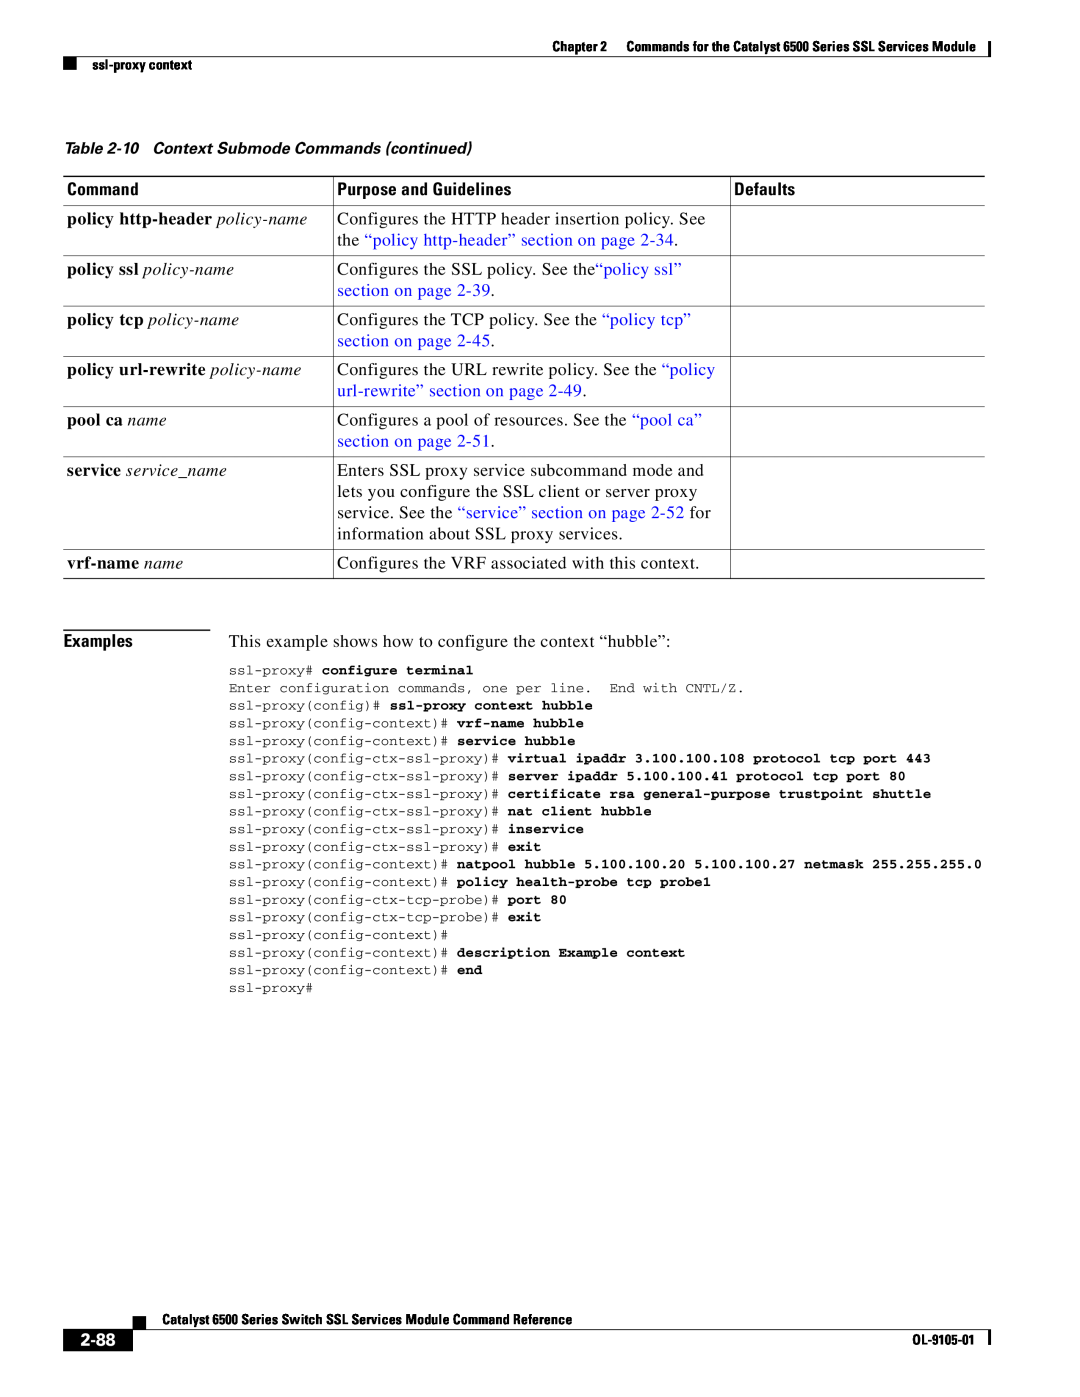 Cisco Systems 6500 Purpose and Guidelines, 2-88, Command, Defaults, the “policy http-header” section on page, Examples 